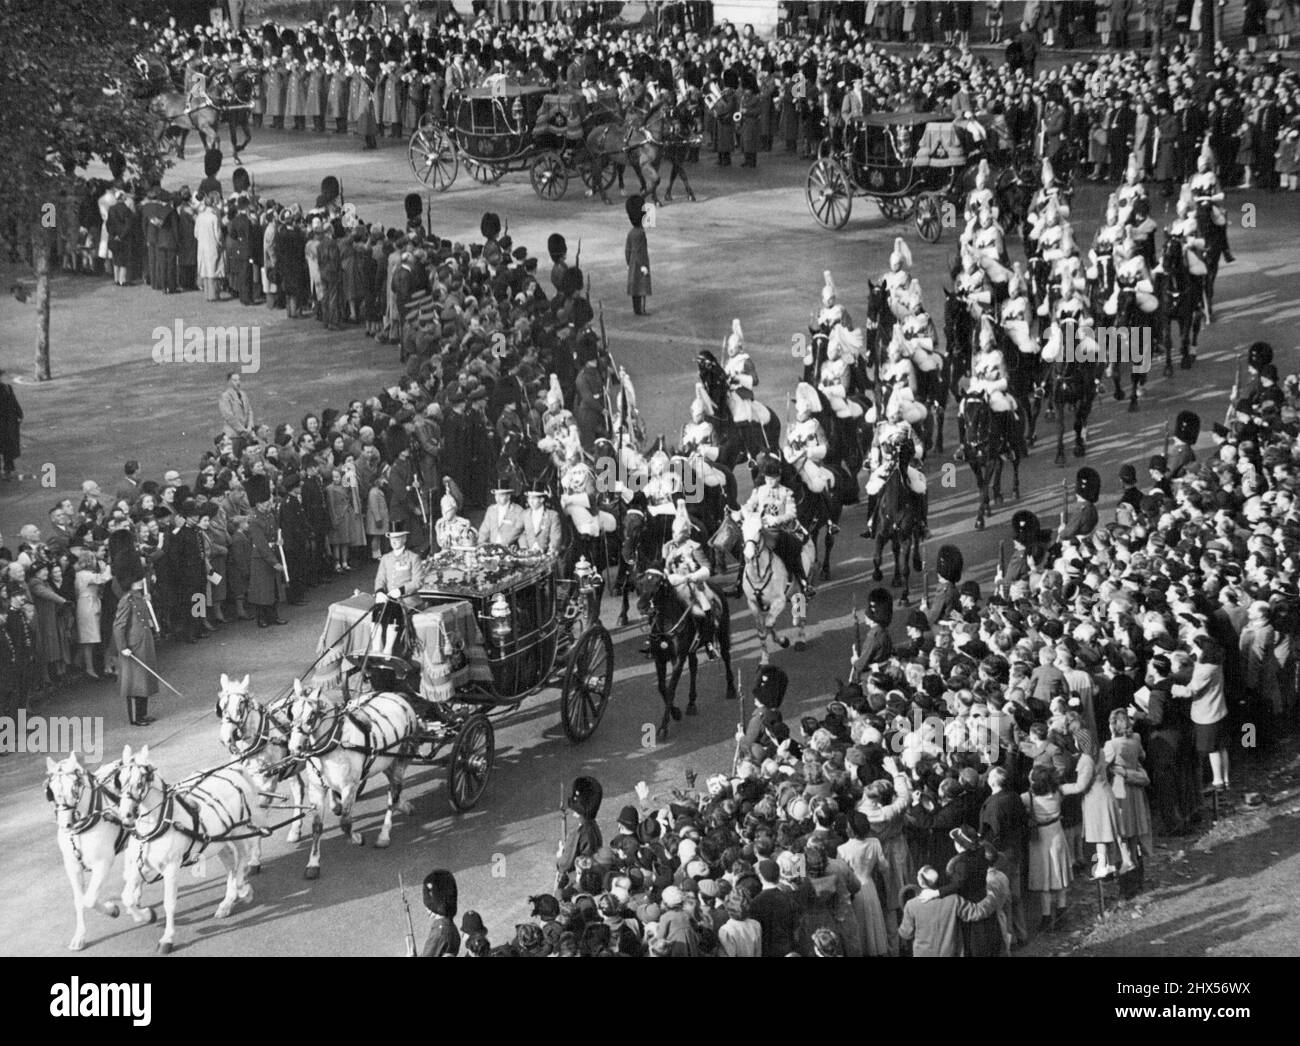 King and Queen on Way to Open Parliament: The black and gold Irish State coach drawn by four Windsor Greys and Bearing their Majesties, King George VI and Queen Elizabeth , turns into horse Guards Parade on way from Buckingham Palace to the Houses of Parliament Westminster, London, this morning October 26. The household Cavalry follow with four State Landaus carrying officers of the Royal Household and members of the Royal Suite bringing up the rear.The King was visiting Parliament this morning for the first state opening with full ceremony since 1938. The Imperial State grown and Parliamentar Stock Photo